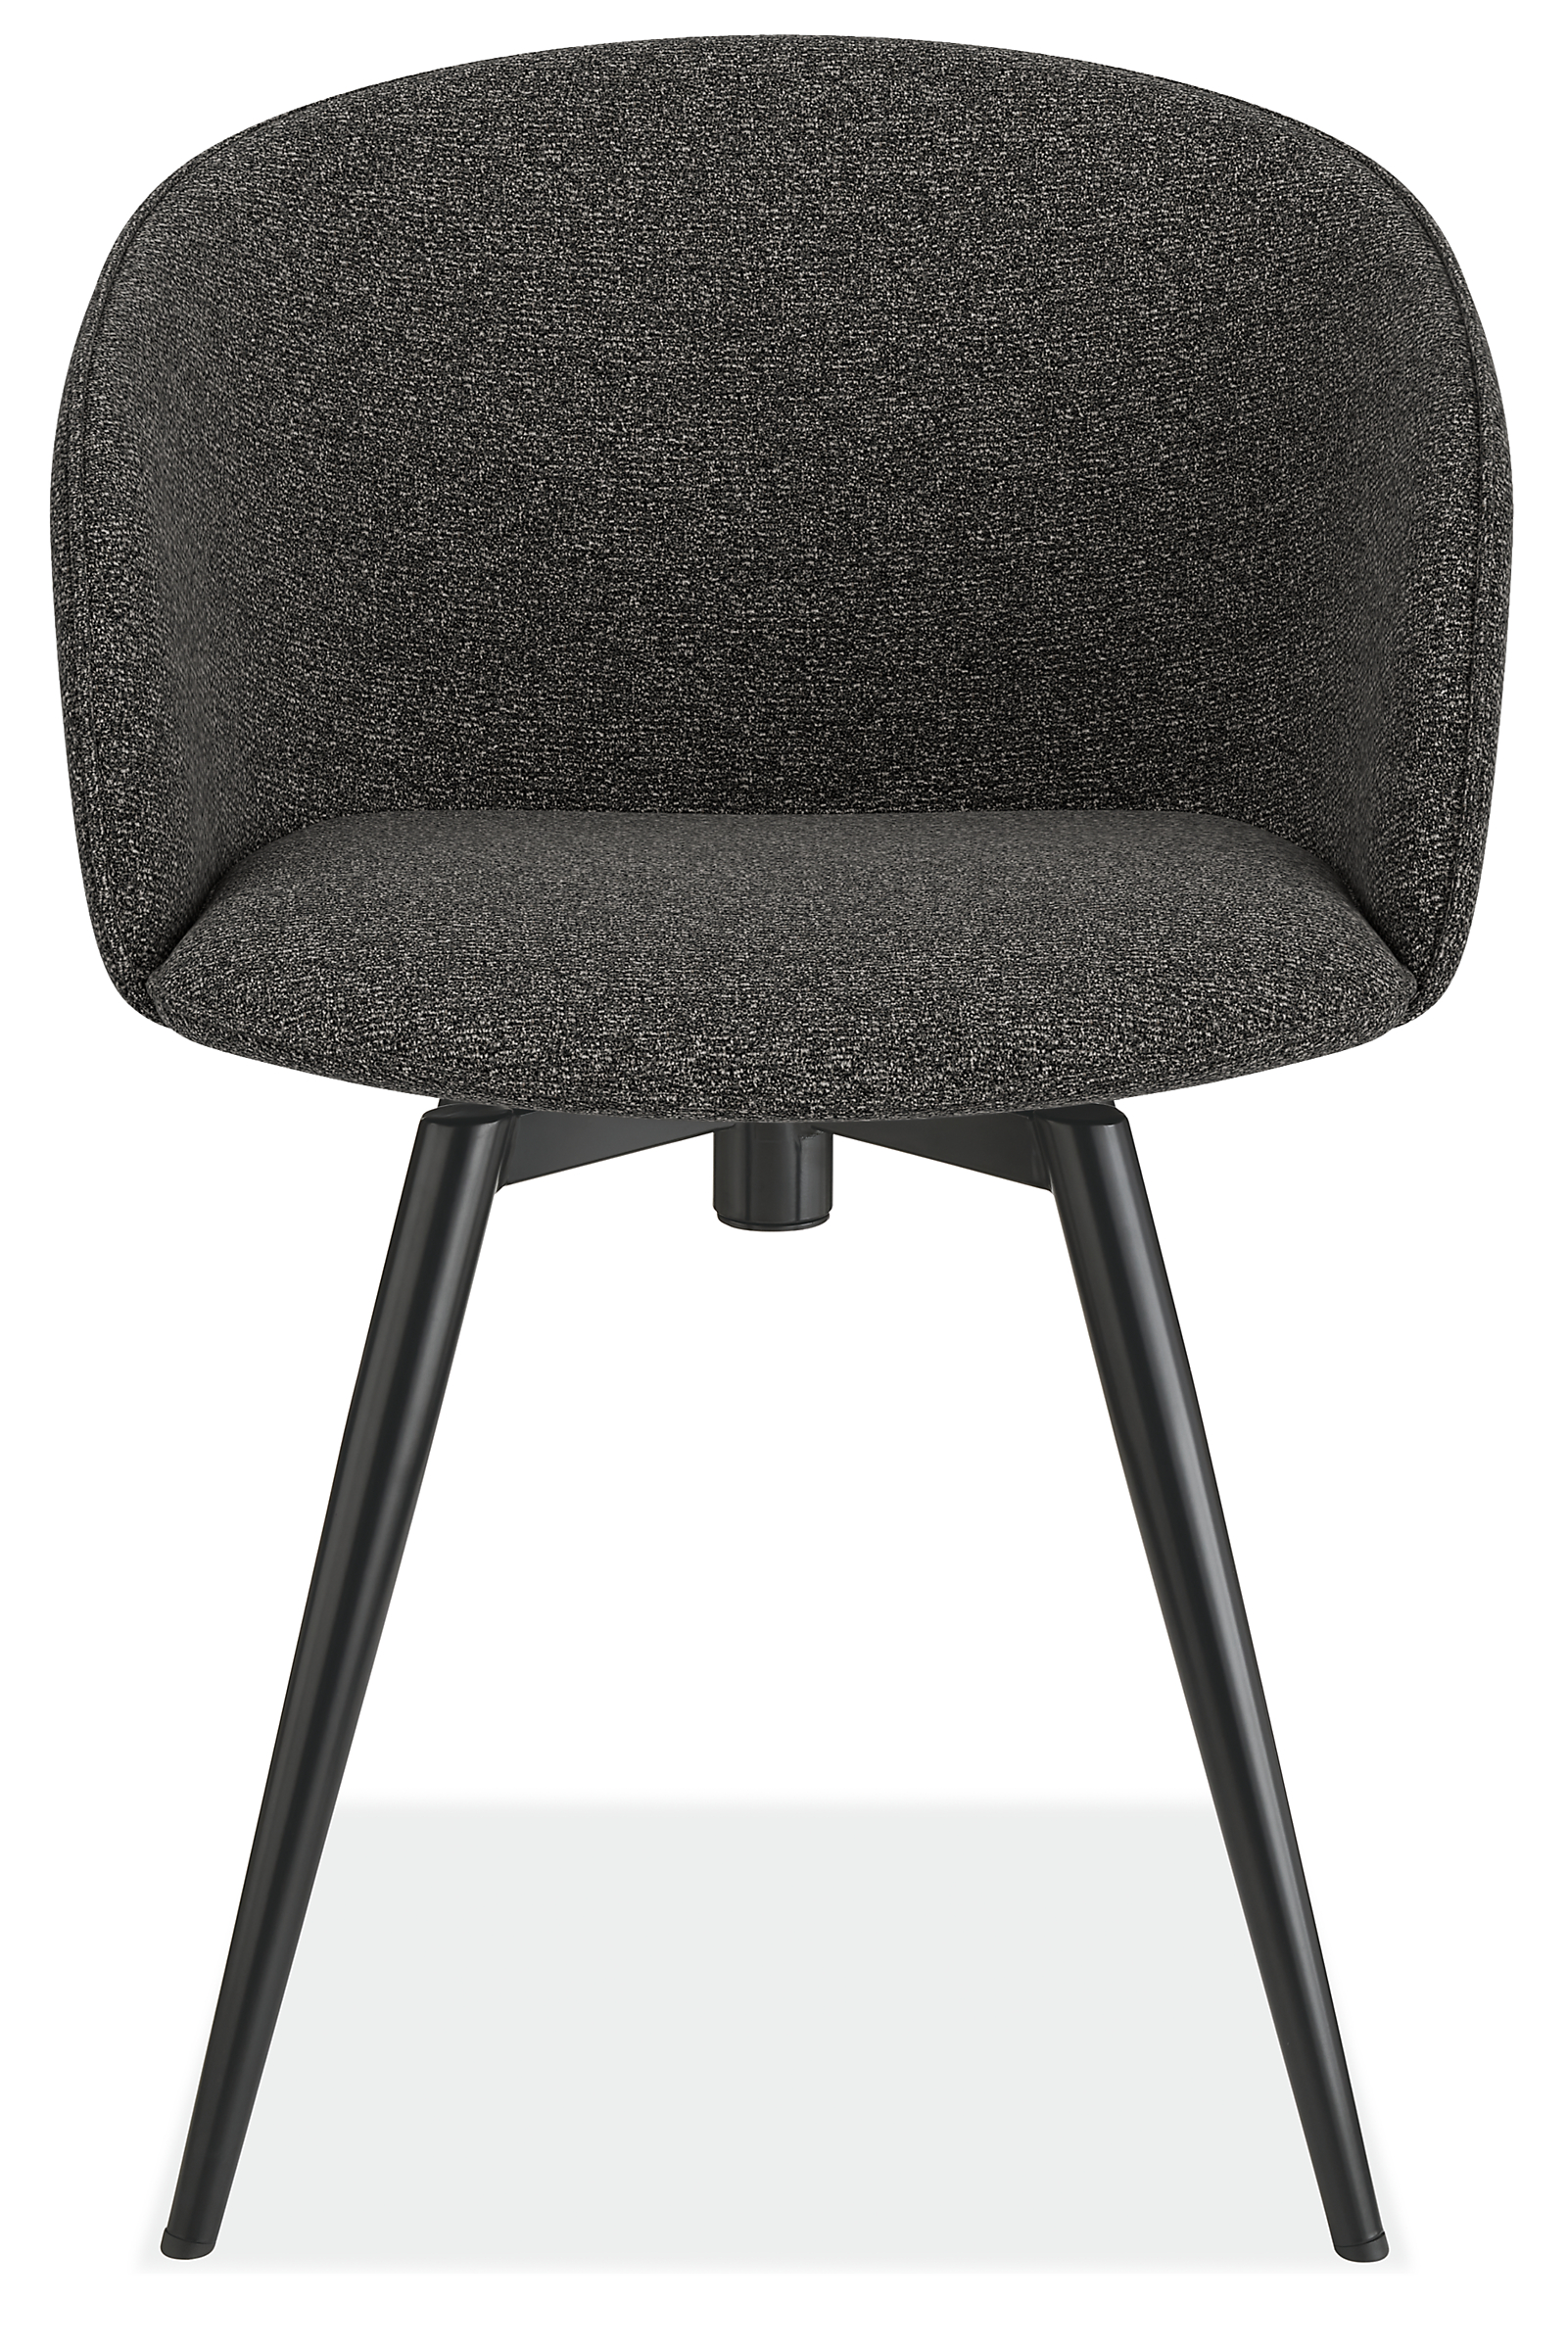 Front view of Sylvan Swivel Side Chair in Radford Grey Fabric and graphite base.